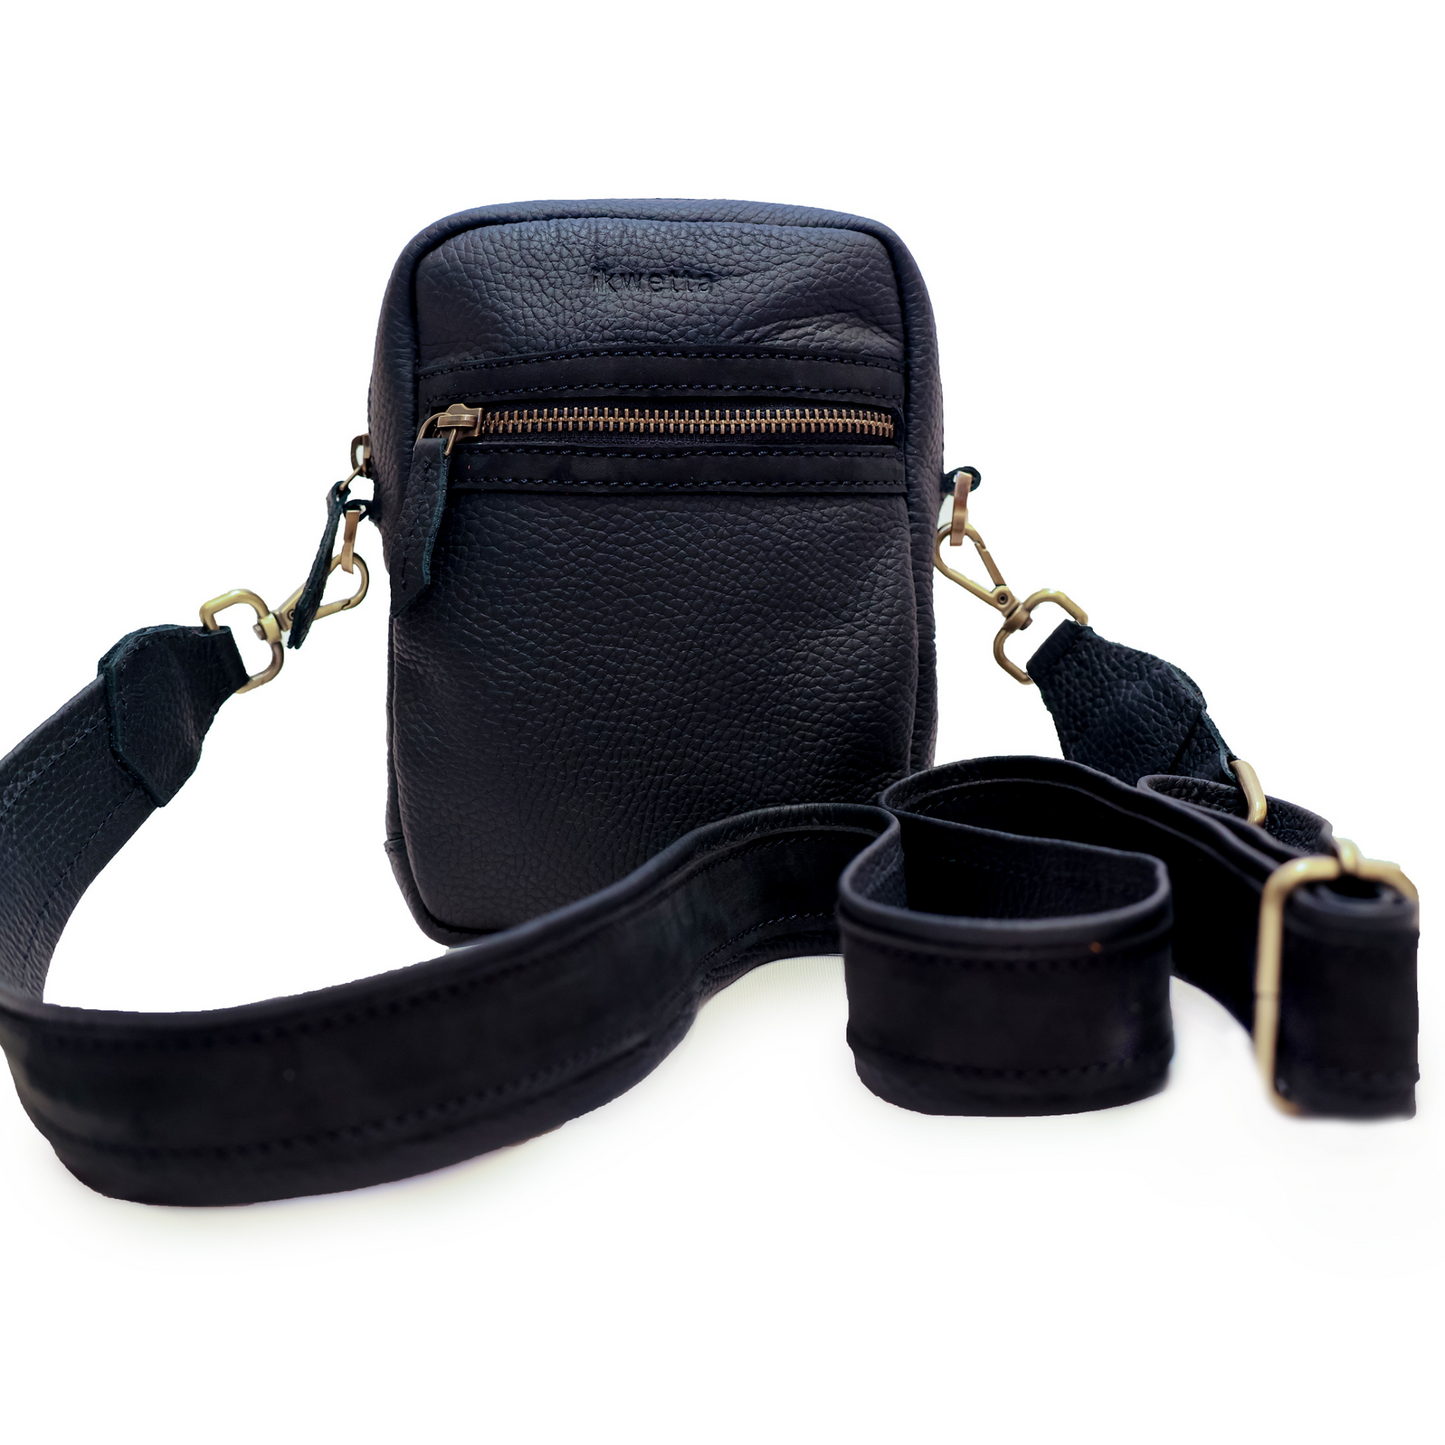 Men's crossbody bag in Black milled leather and hunting suede with adjustable crossbody strap